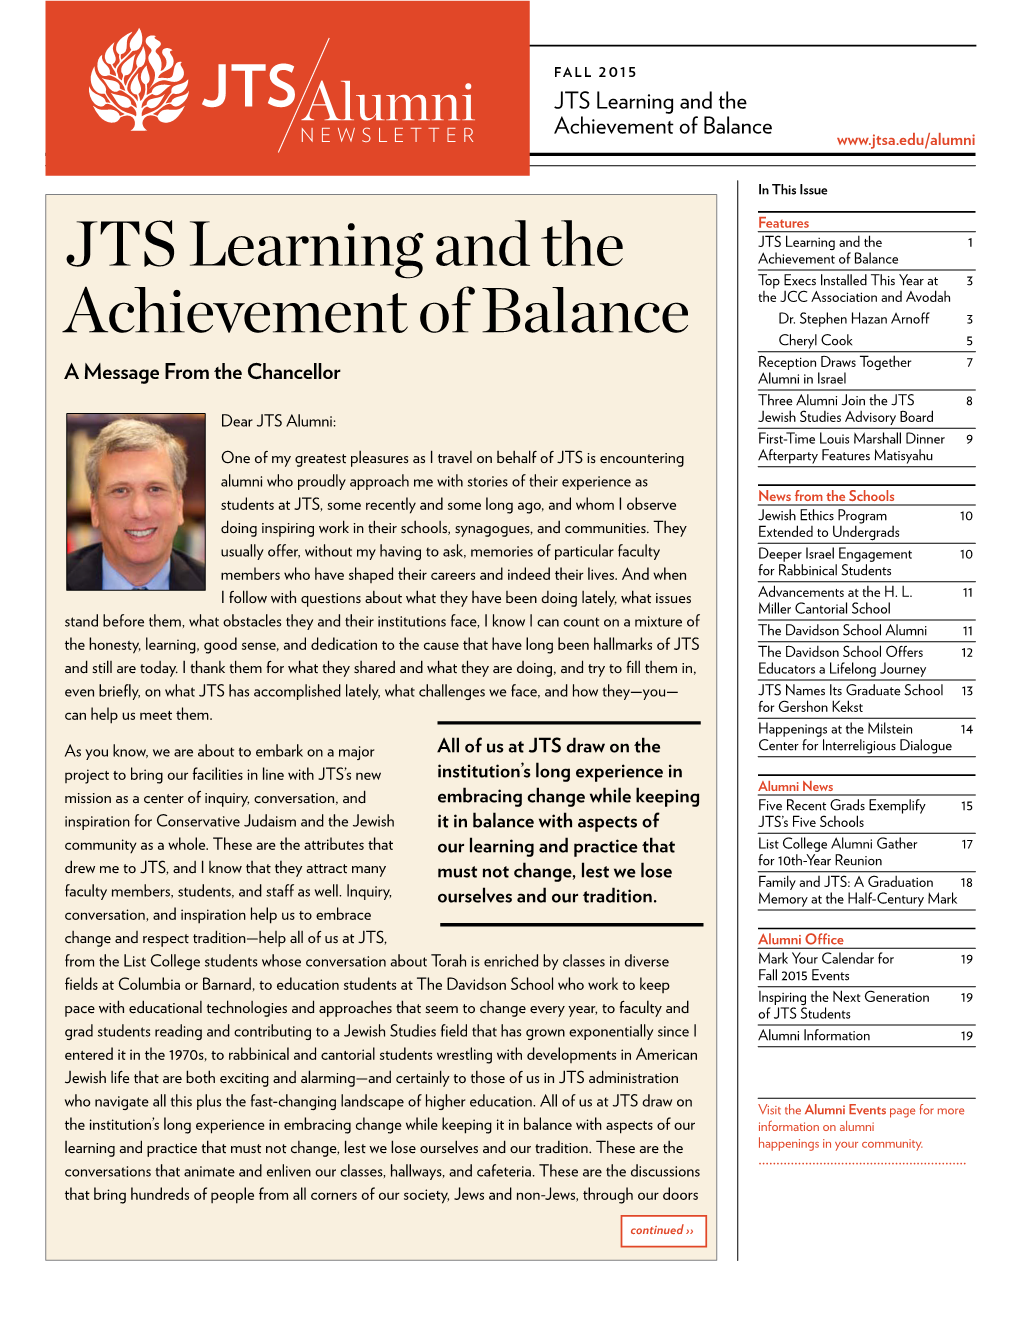 JTS Learning and the Achievement of Balance